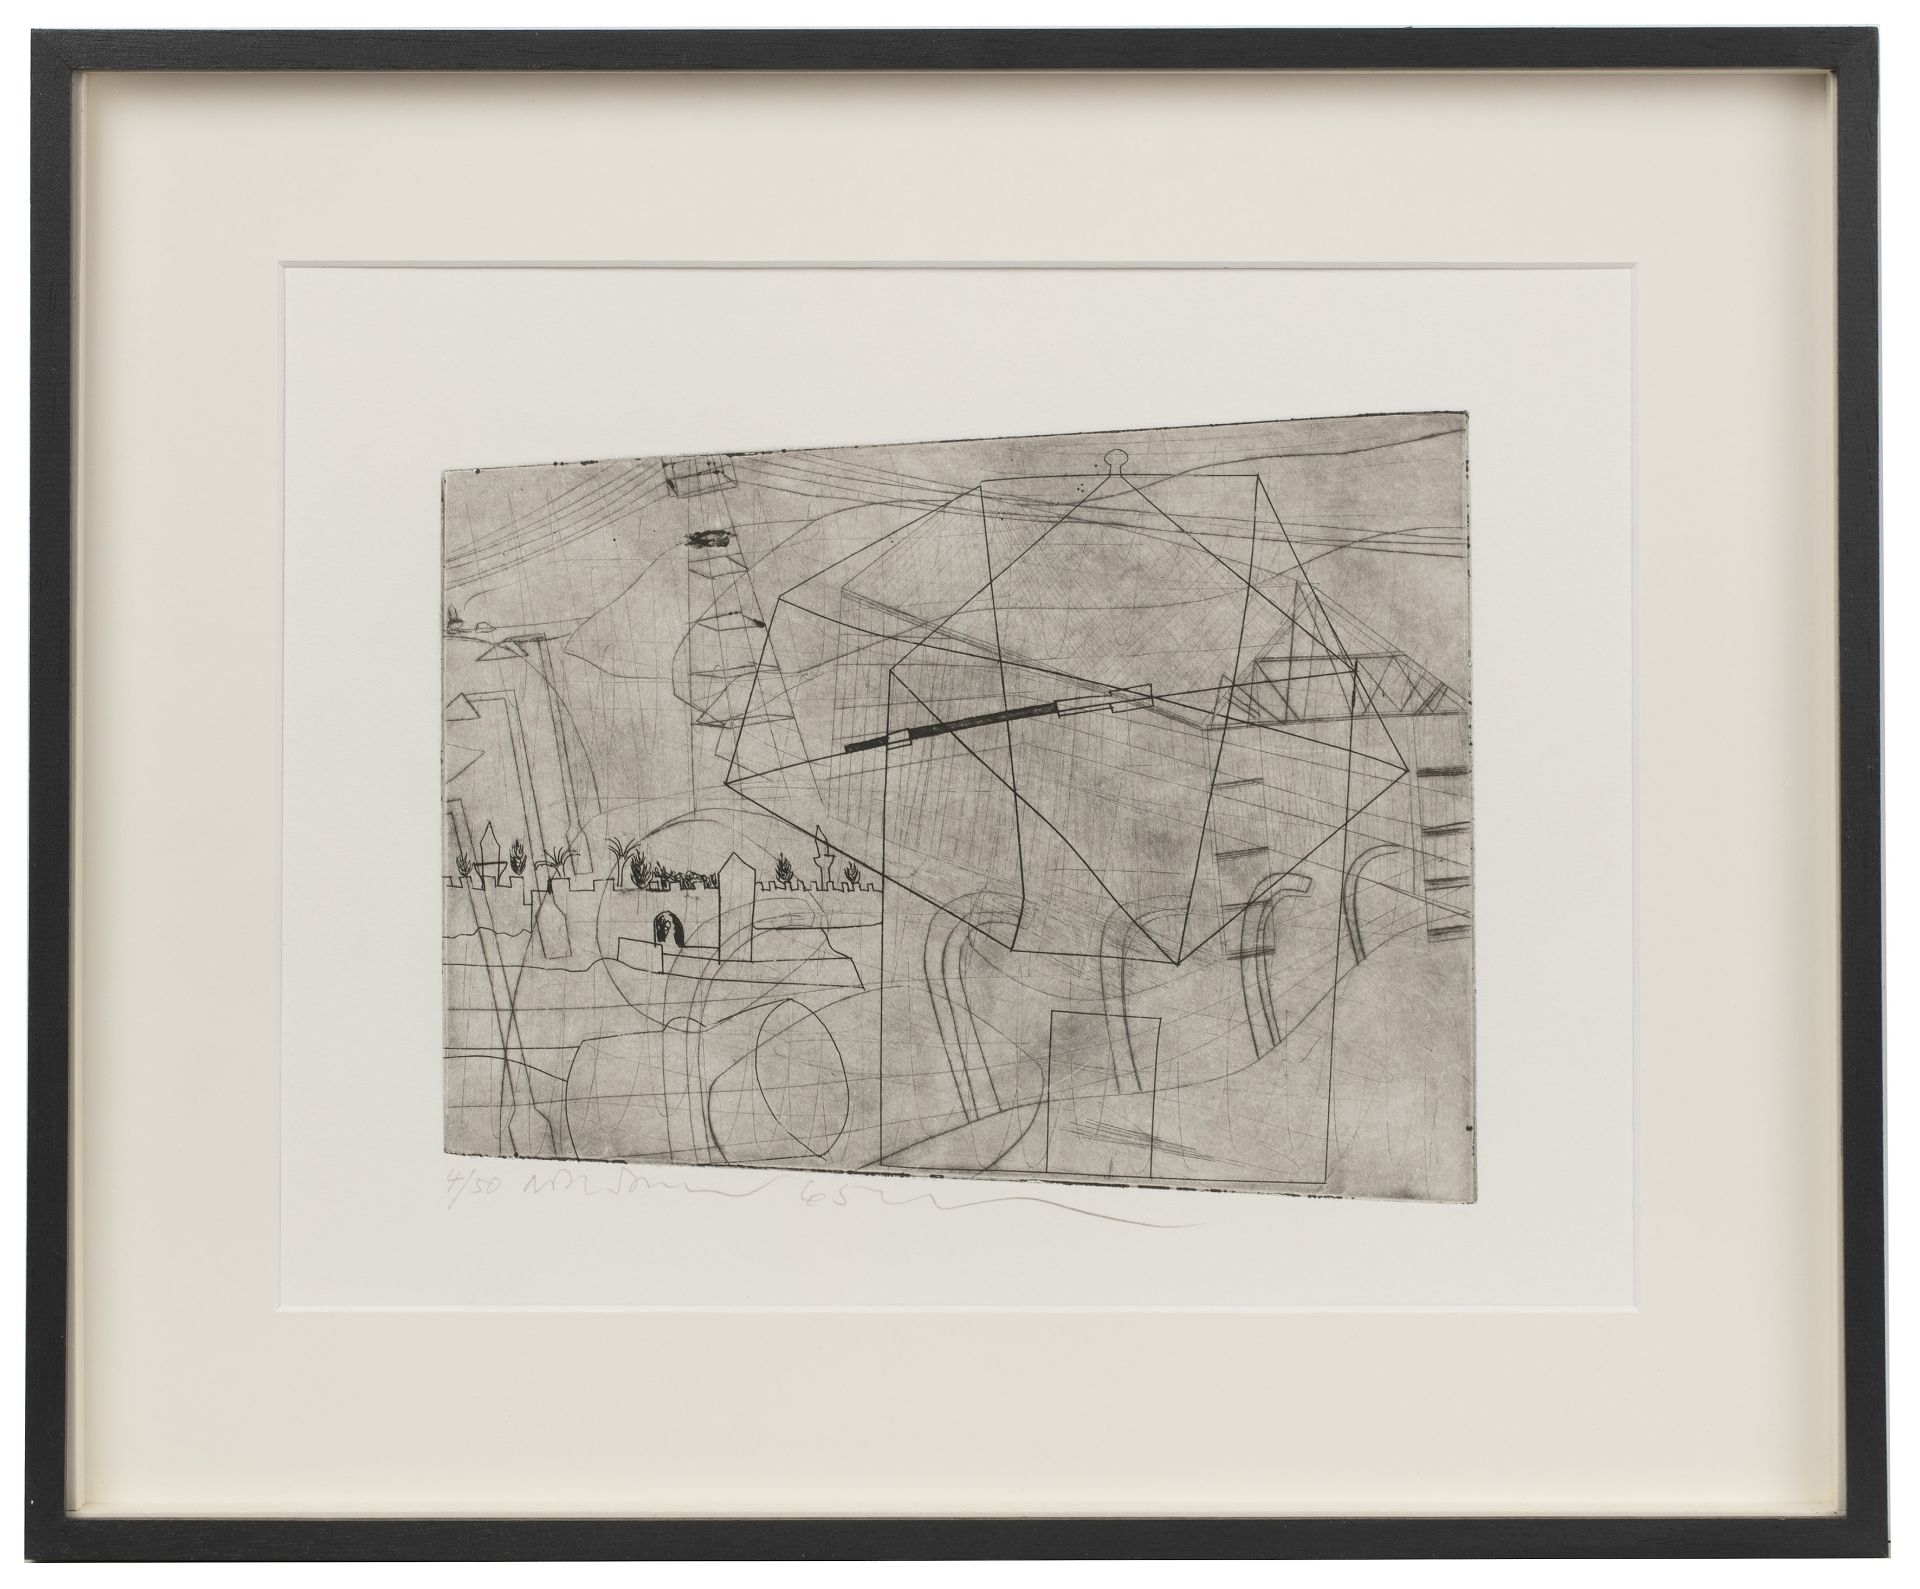 Ben Nicholson (1894-1982) Moonshine,1965/6 4/50, signed and numbered in pencil (in the margin) - Image 2 of 3